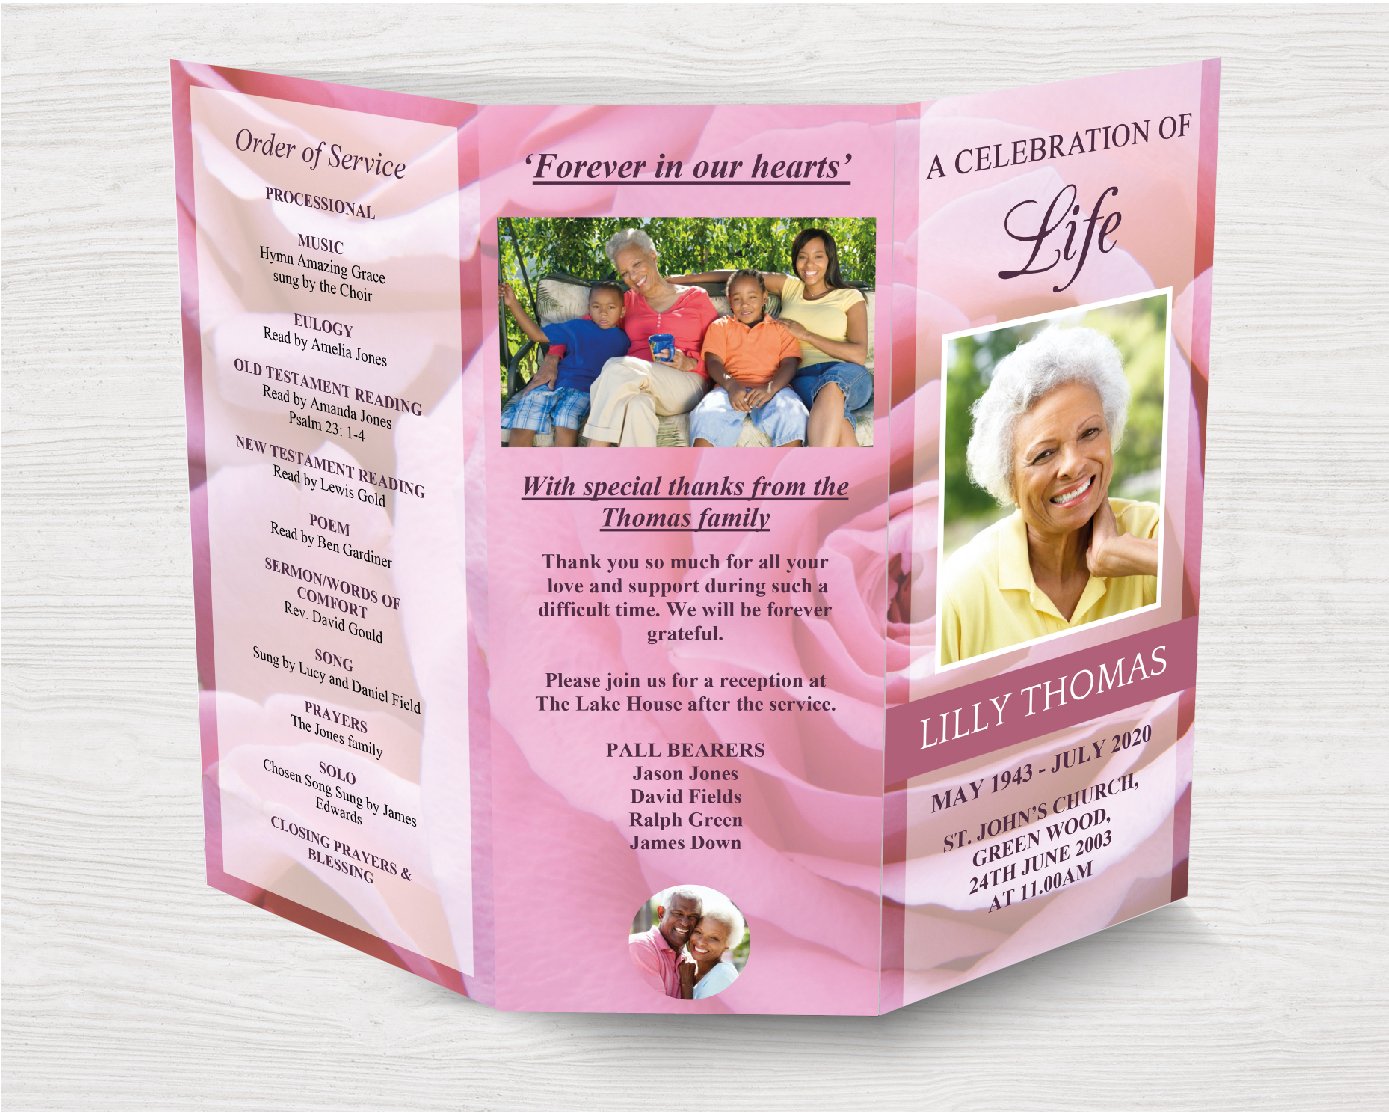 Trifold Pink Rose Funeral Program Template (Commercial License)